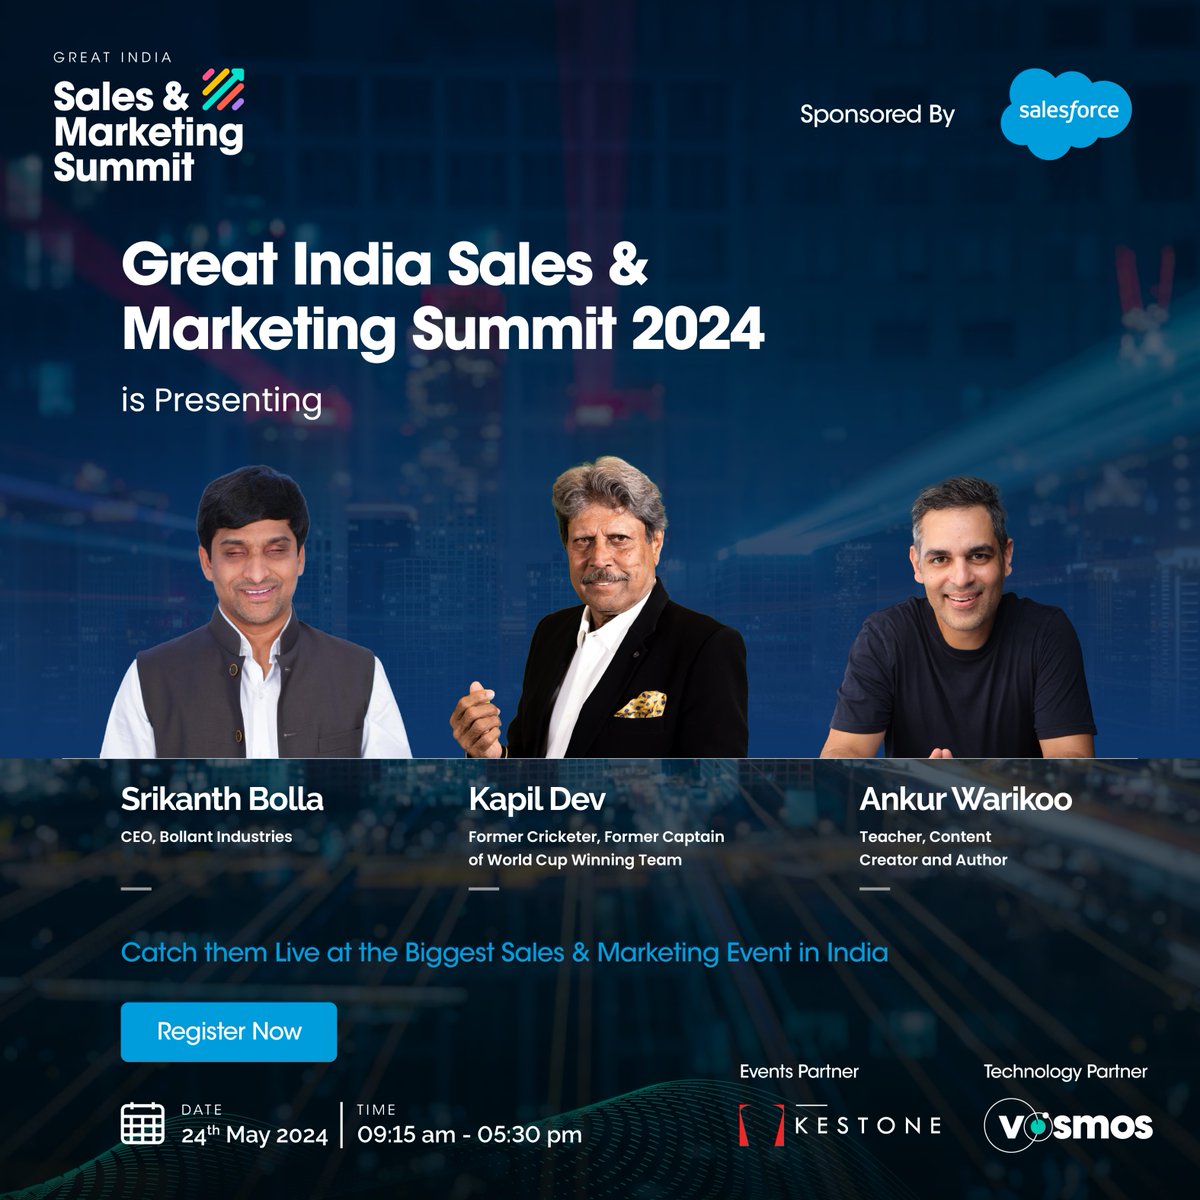 Here are the leading voices who will educate, inspire, and challenge conventional leadership this May 24th! Visit bit.ly/4a9BhjN to register today! 📅 24th May 2024 ⏰ 09:15 am - 05:30 pm #Salesforce #GISMS2024 #GreatIndiaSummit #KapilDev #AnkurWarikoo #SrikanthBolla